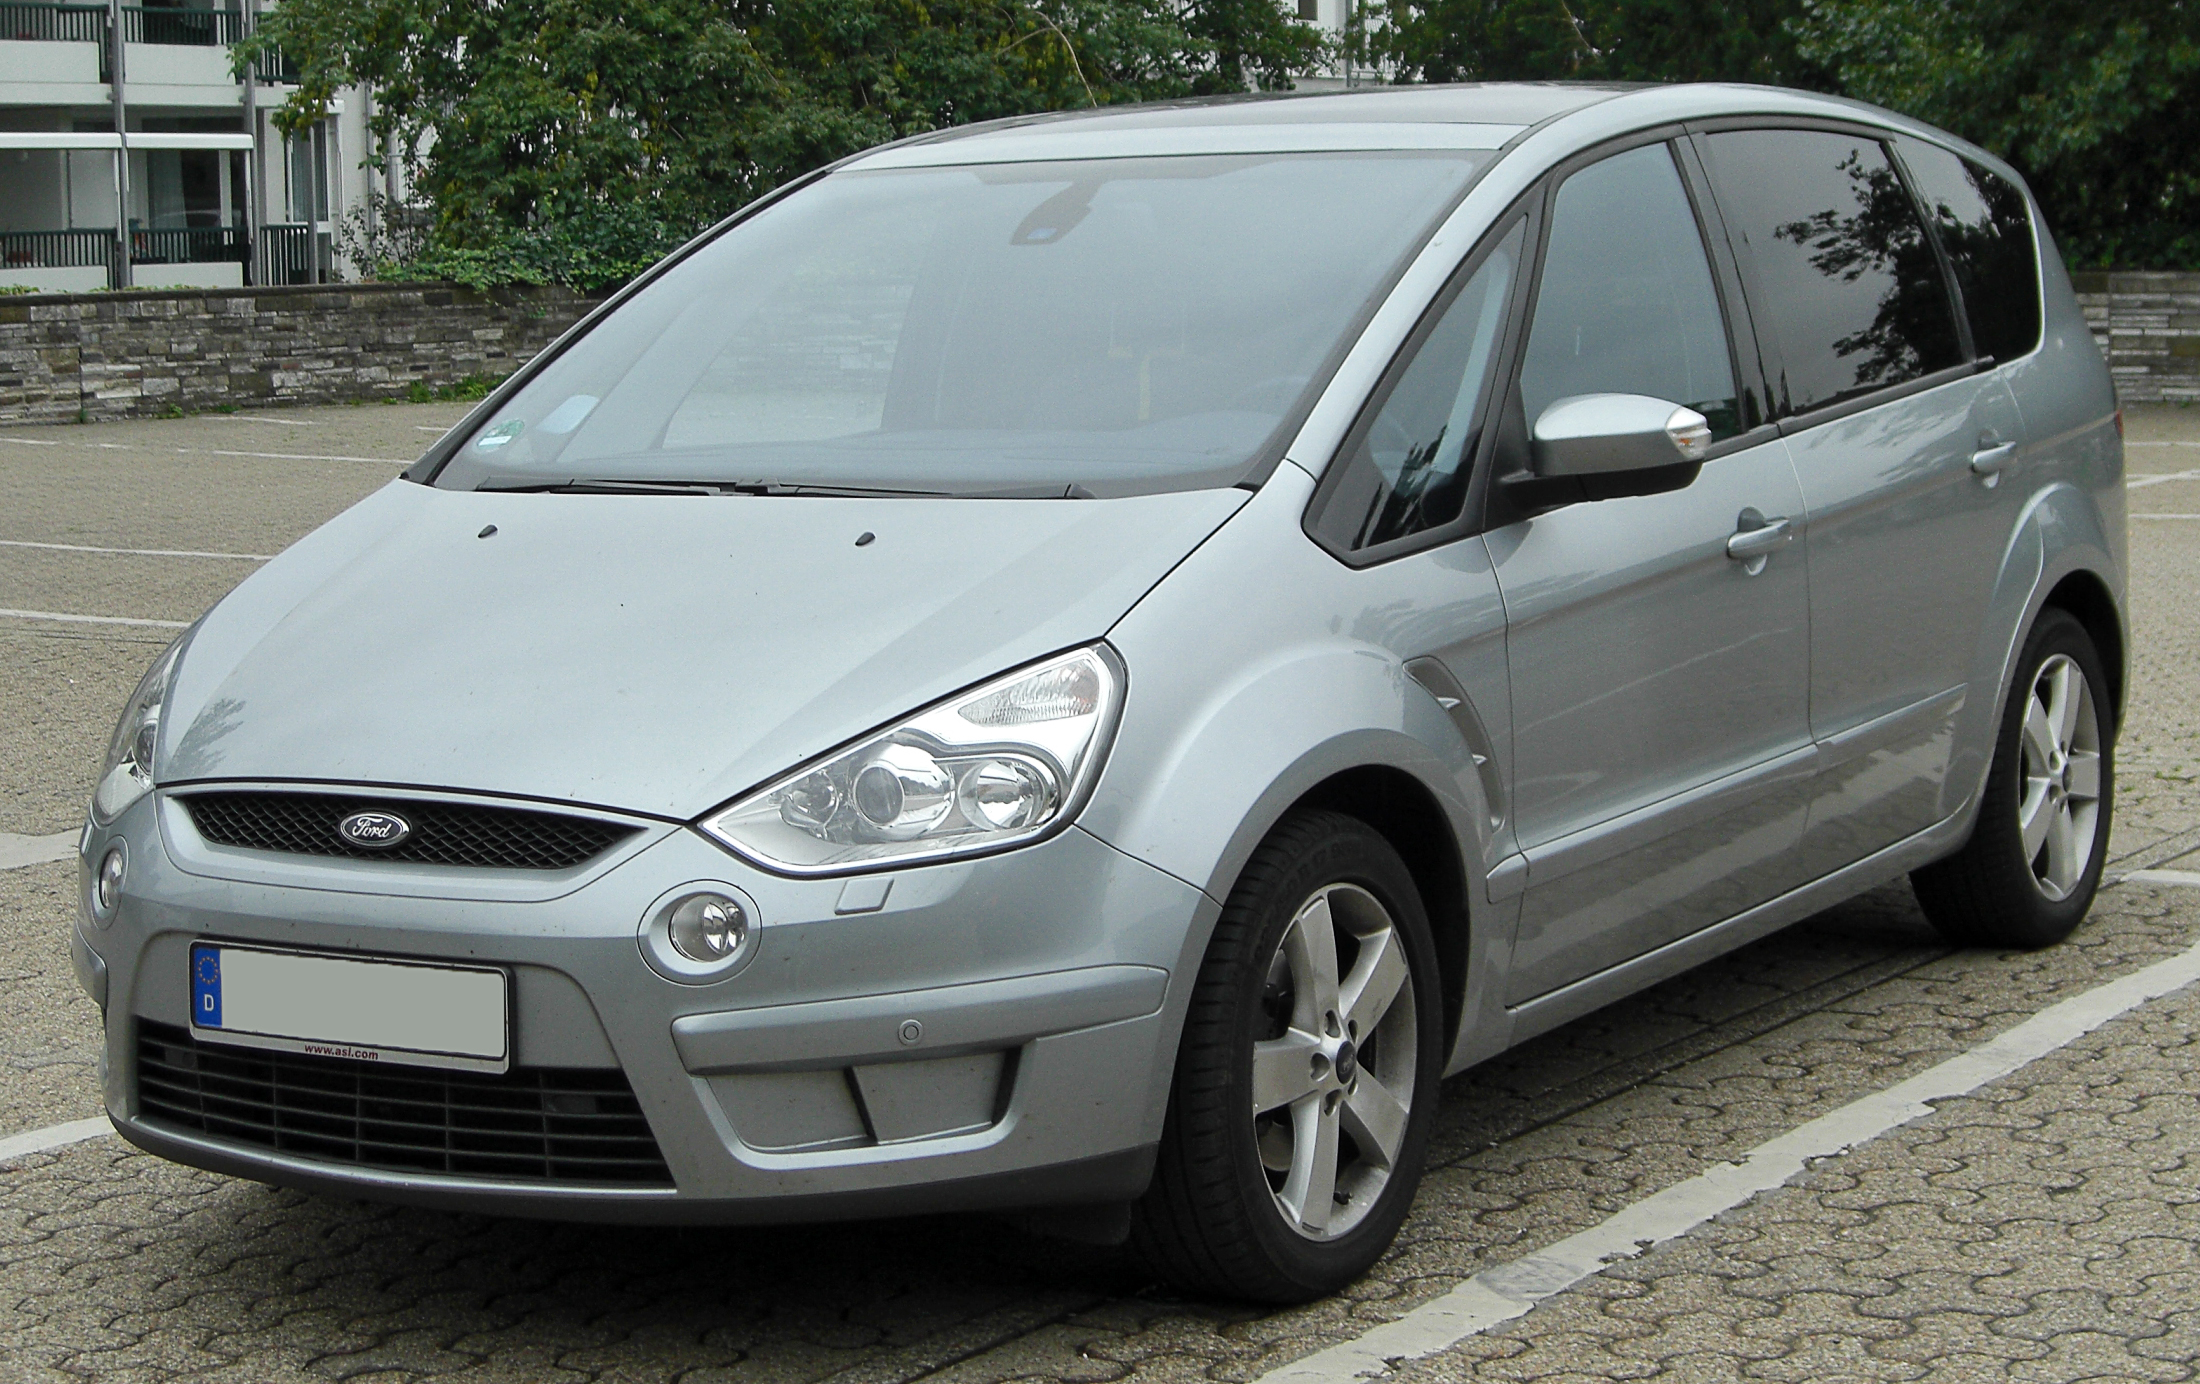 Ford S-Max, Tractor & Construction Plant Wiki